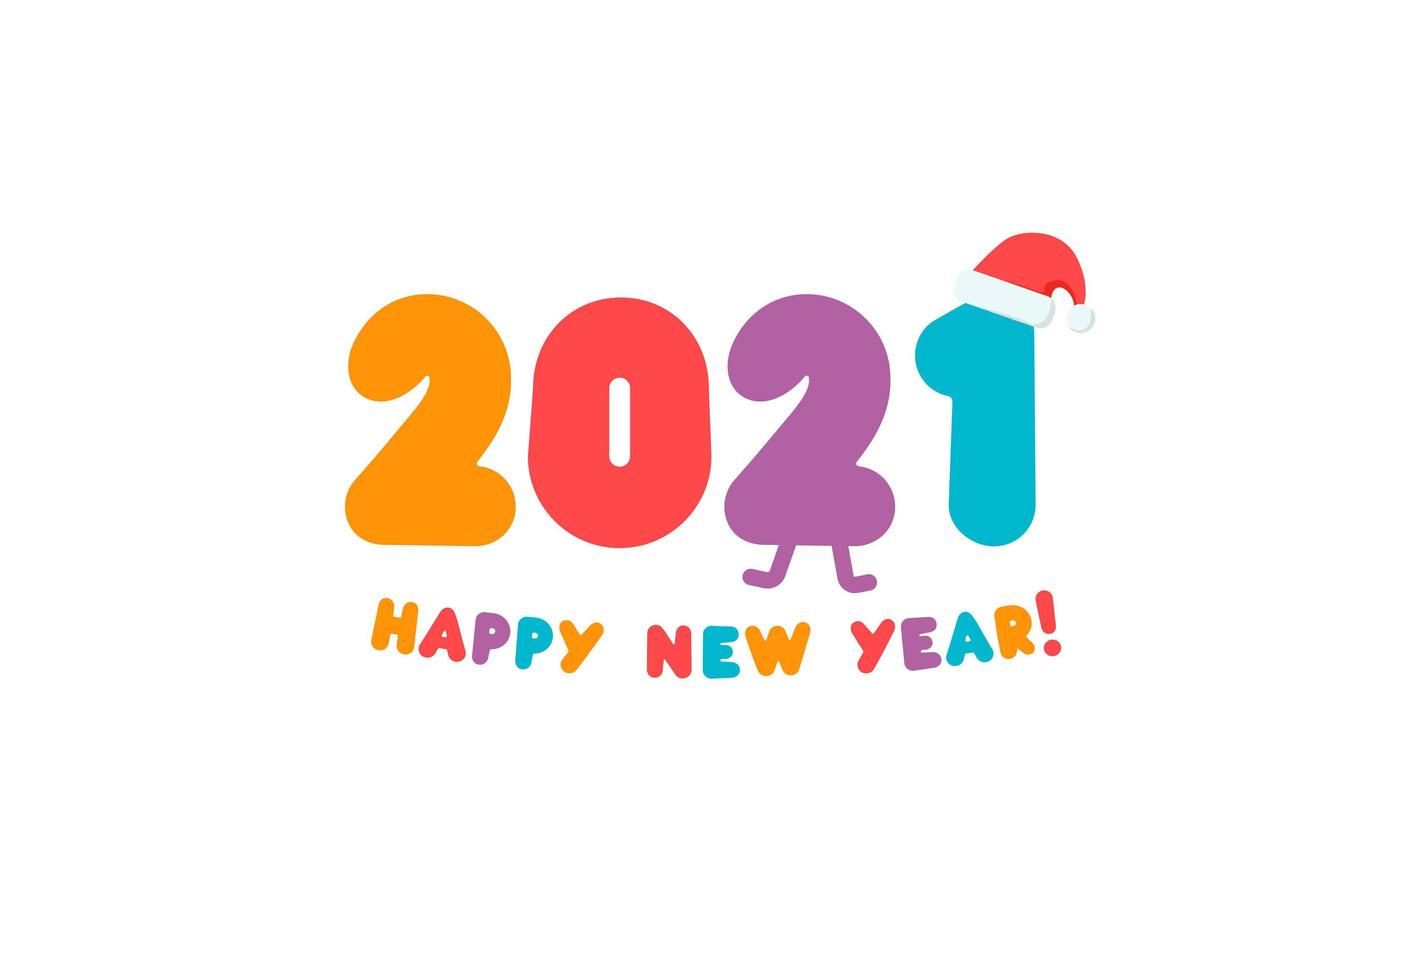 Awesome 2021 colored numbers greeting card for New Year. Children flat bright color logo for greeting card, calendar headline or holiday decorations. Vector illustration